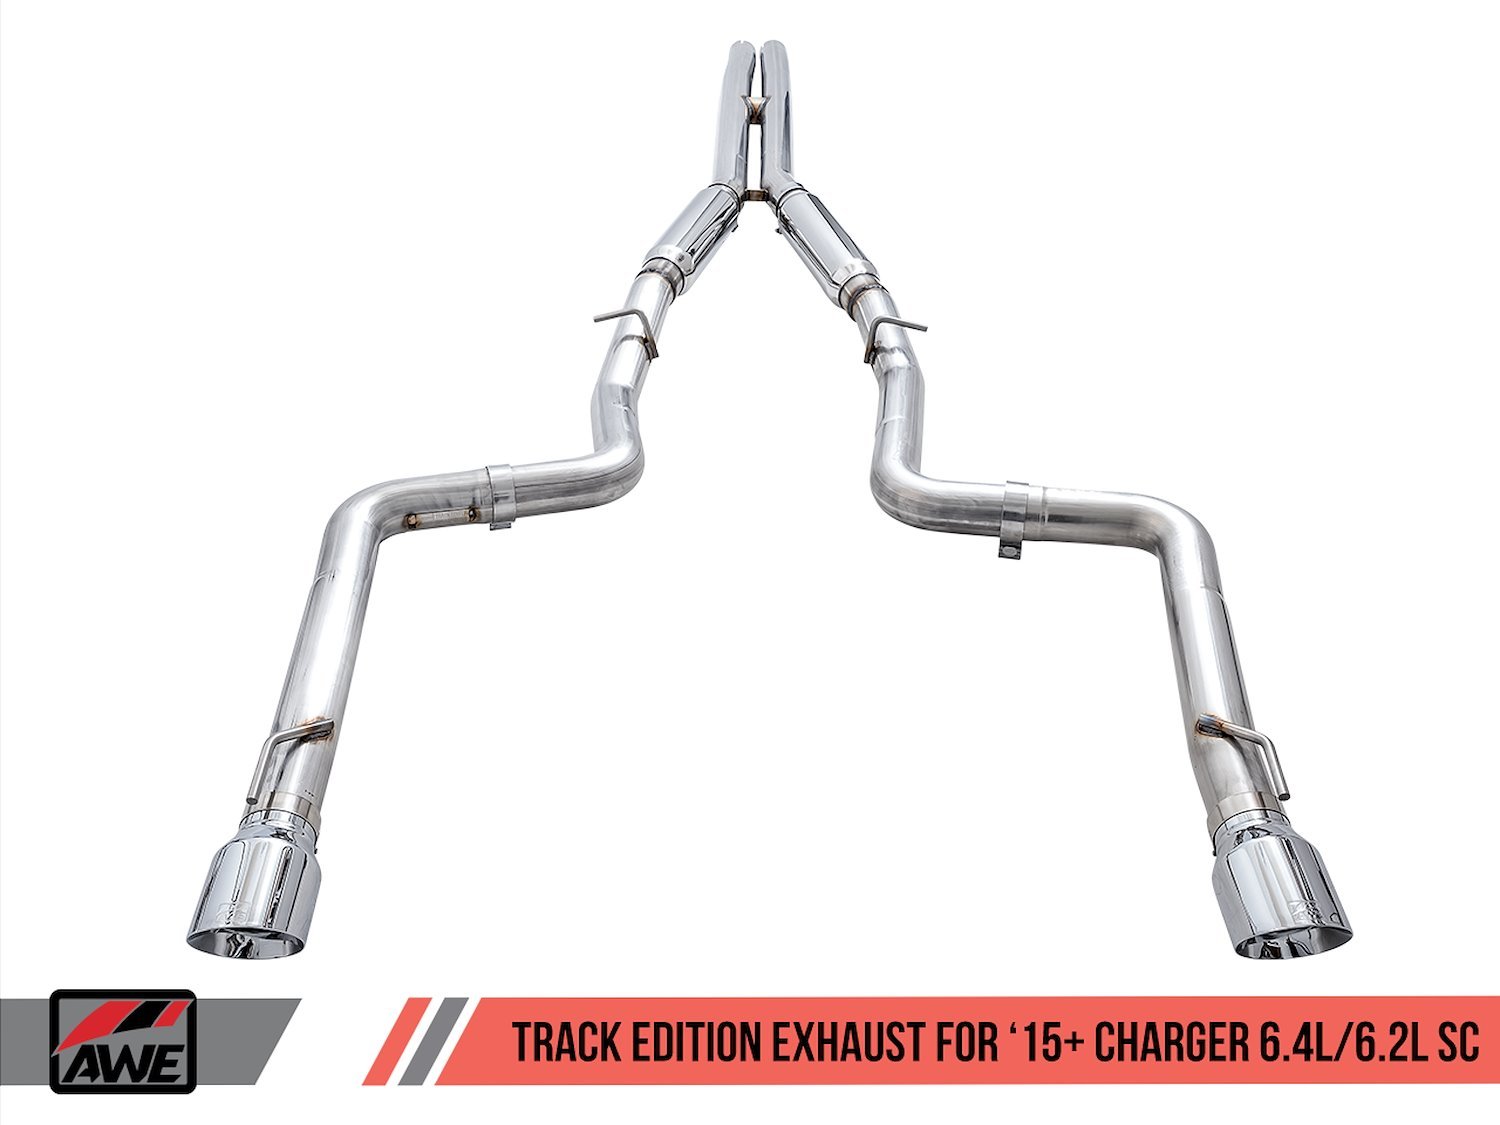 AWE Track Edition Exhaust for 15+ Charger 6.4